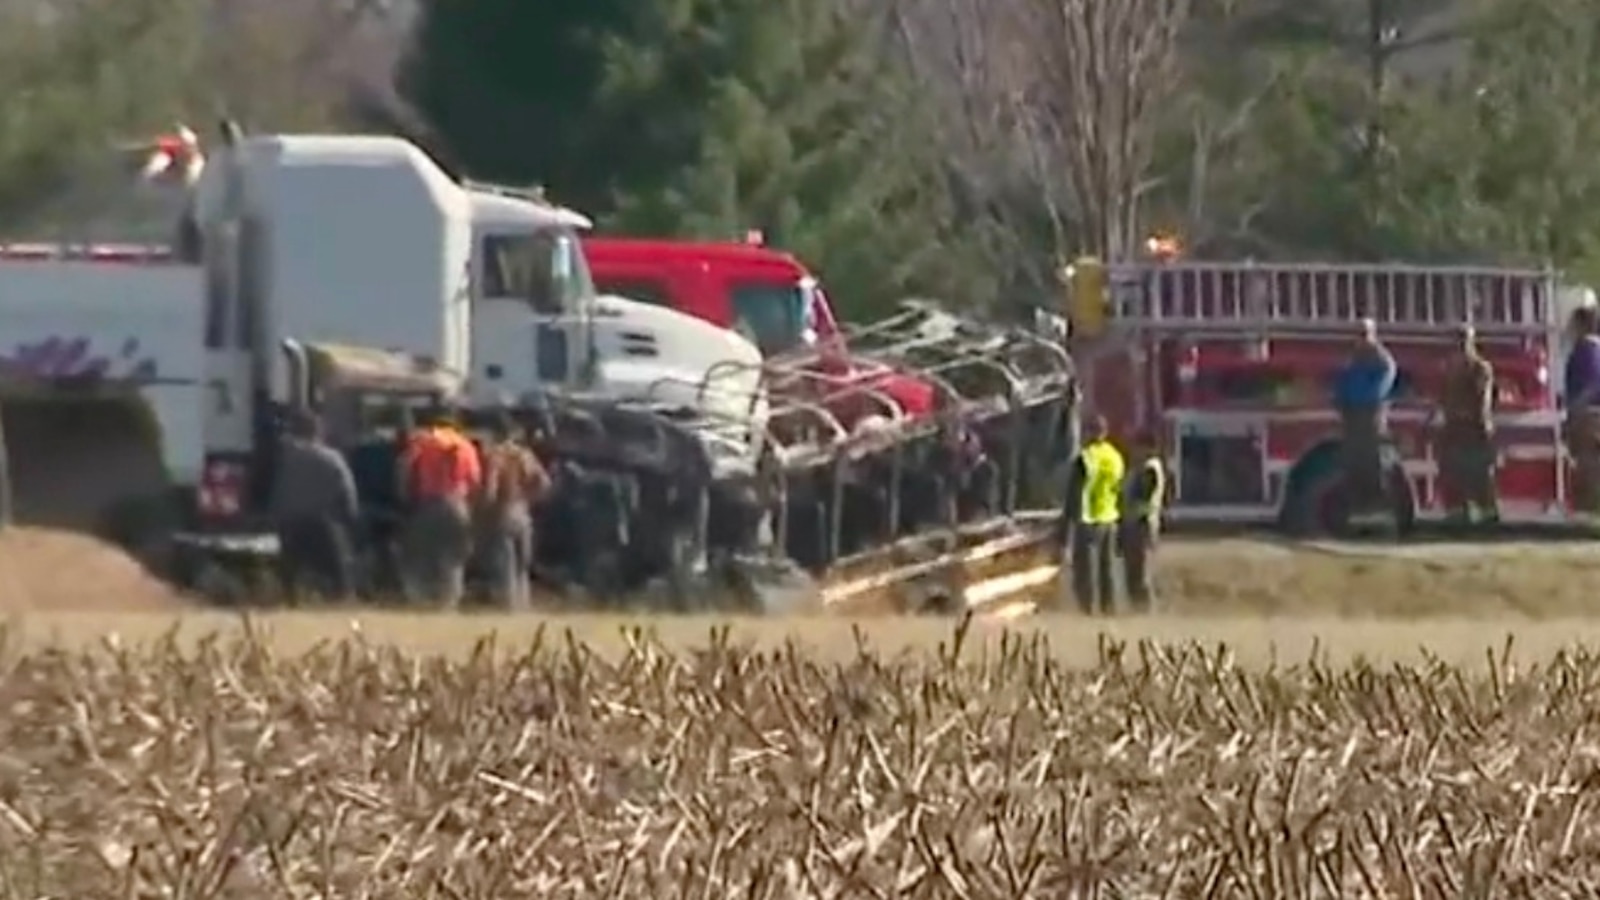 3 children, 2 adults dead after school bus and semi-truck collide in Illinois: Police